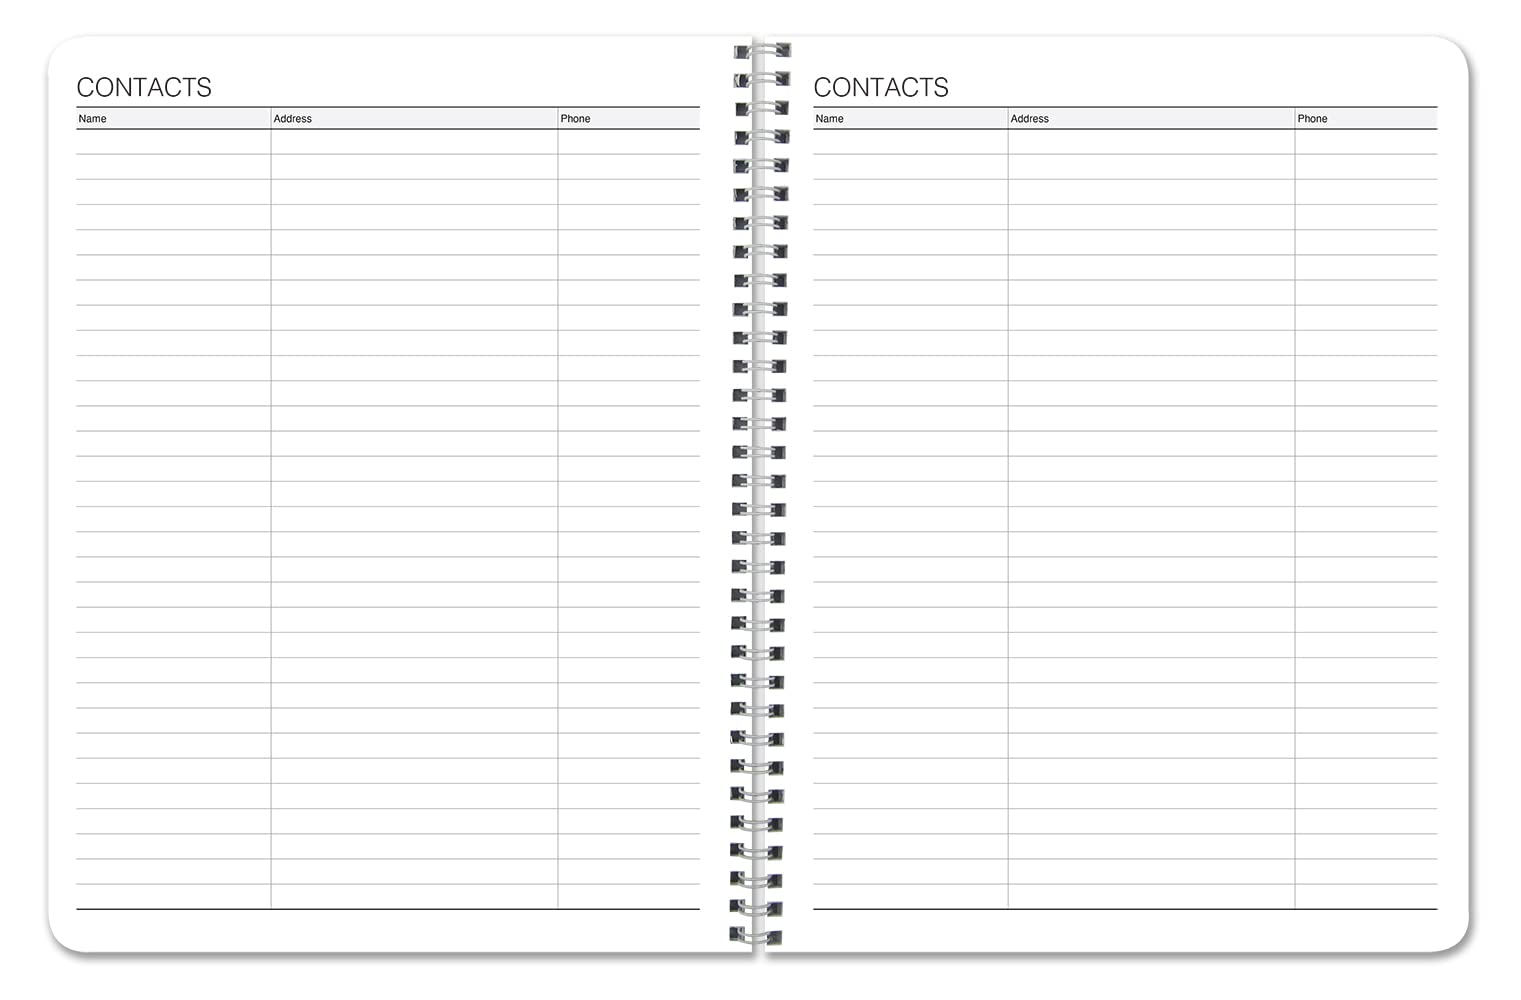 BookFactory 2023 Weekly Calendar (2 Pages per Week - 148 Pages - 6" X 9") / 2023 Weekly Planner/Weekly Organizer. Wire-O Bound (CAL-148-69CW-A(WEEKLY-CAL2023))